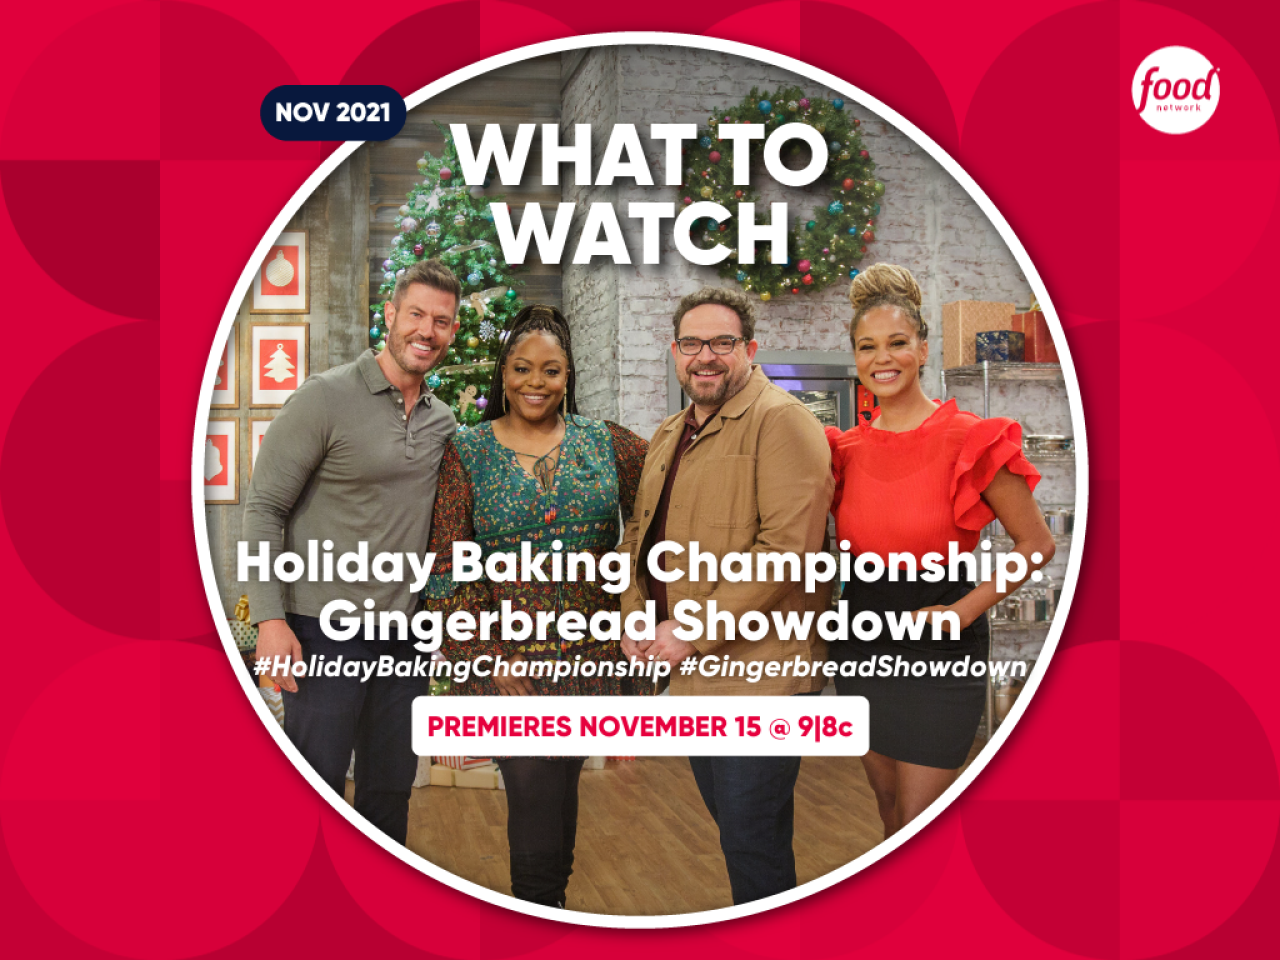 Holiday Baking, Christmas Cookies and More to Watch in November FN